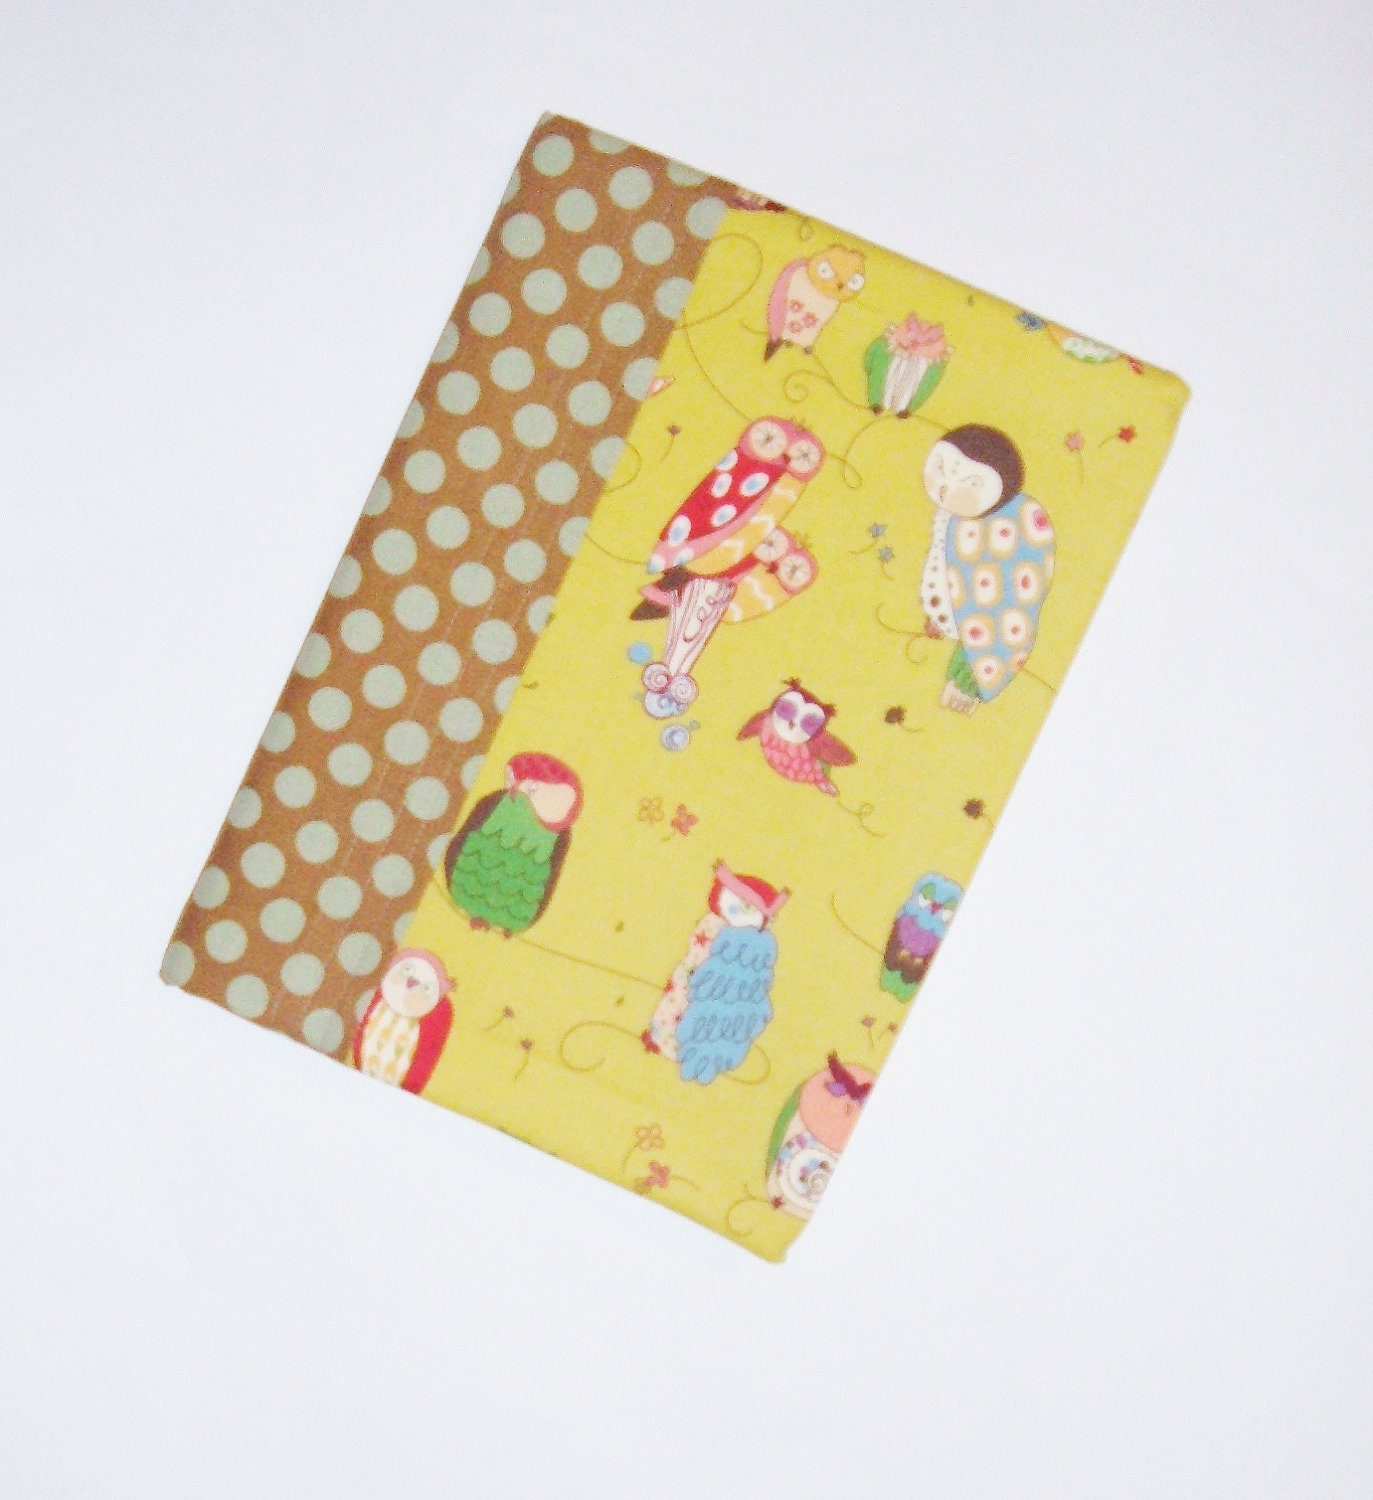 Journal - Fabric Covered Notebook  - Owls - Diary - Back to School - pasqueflower